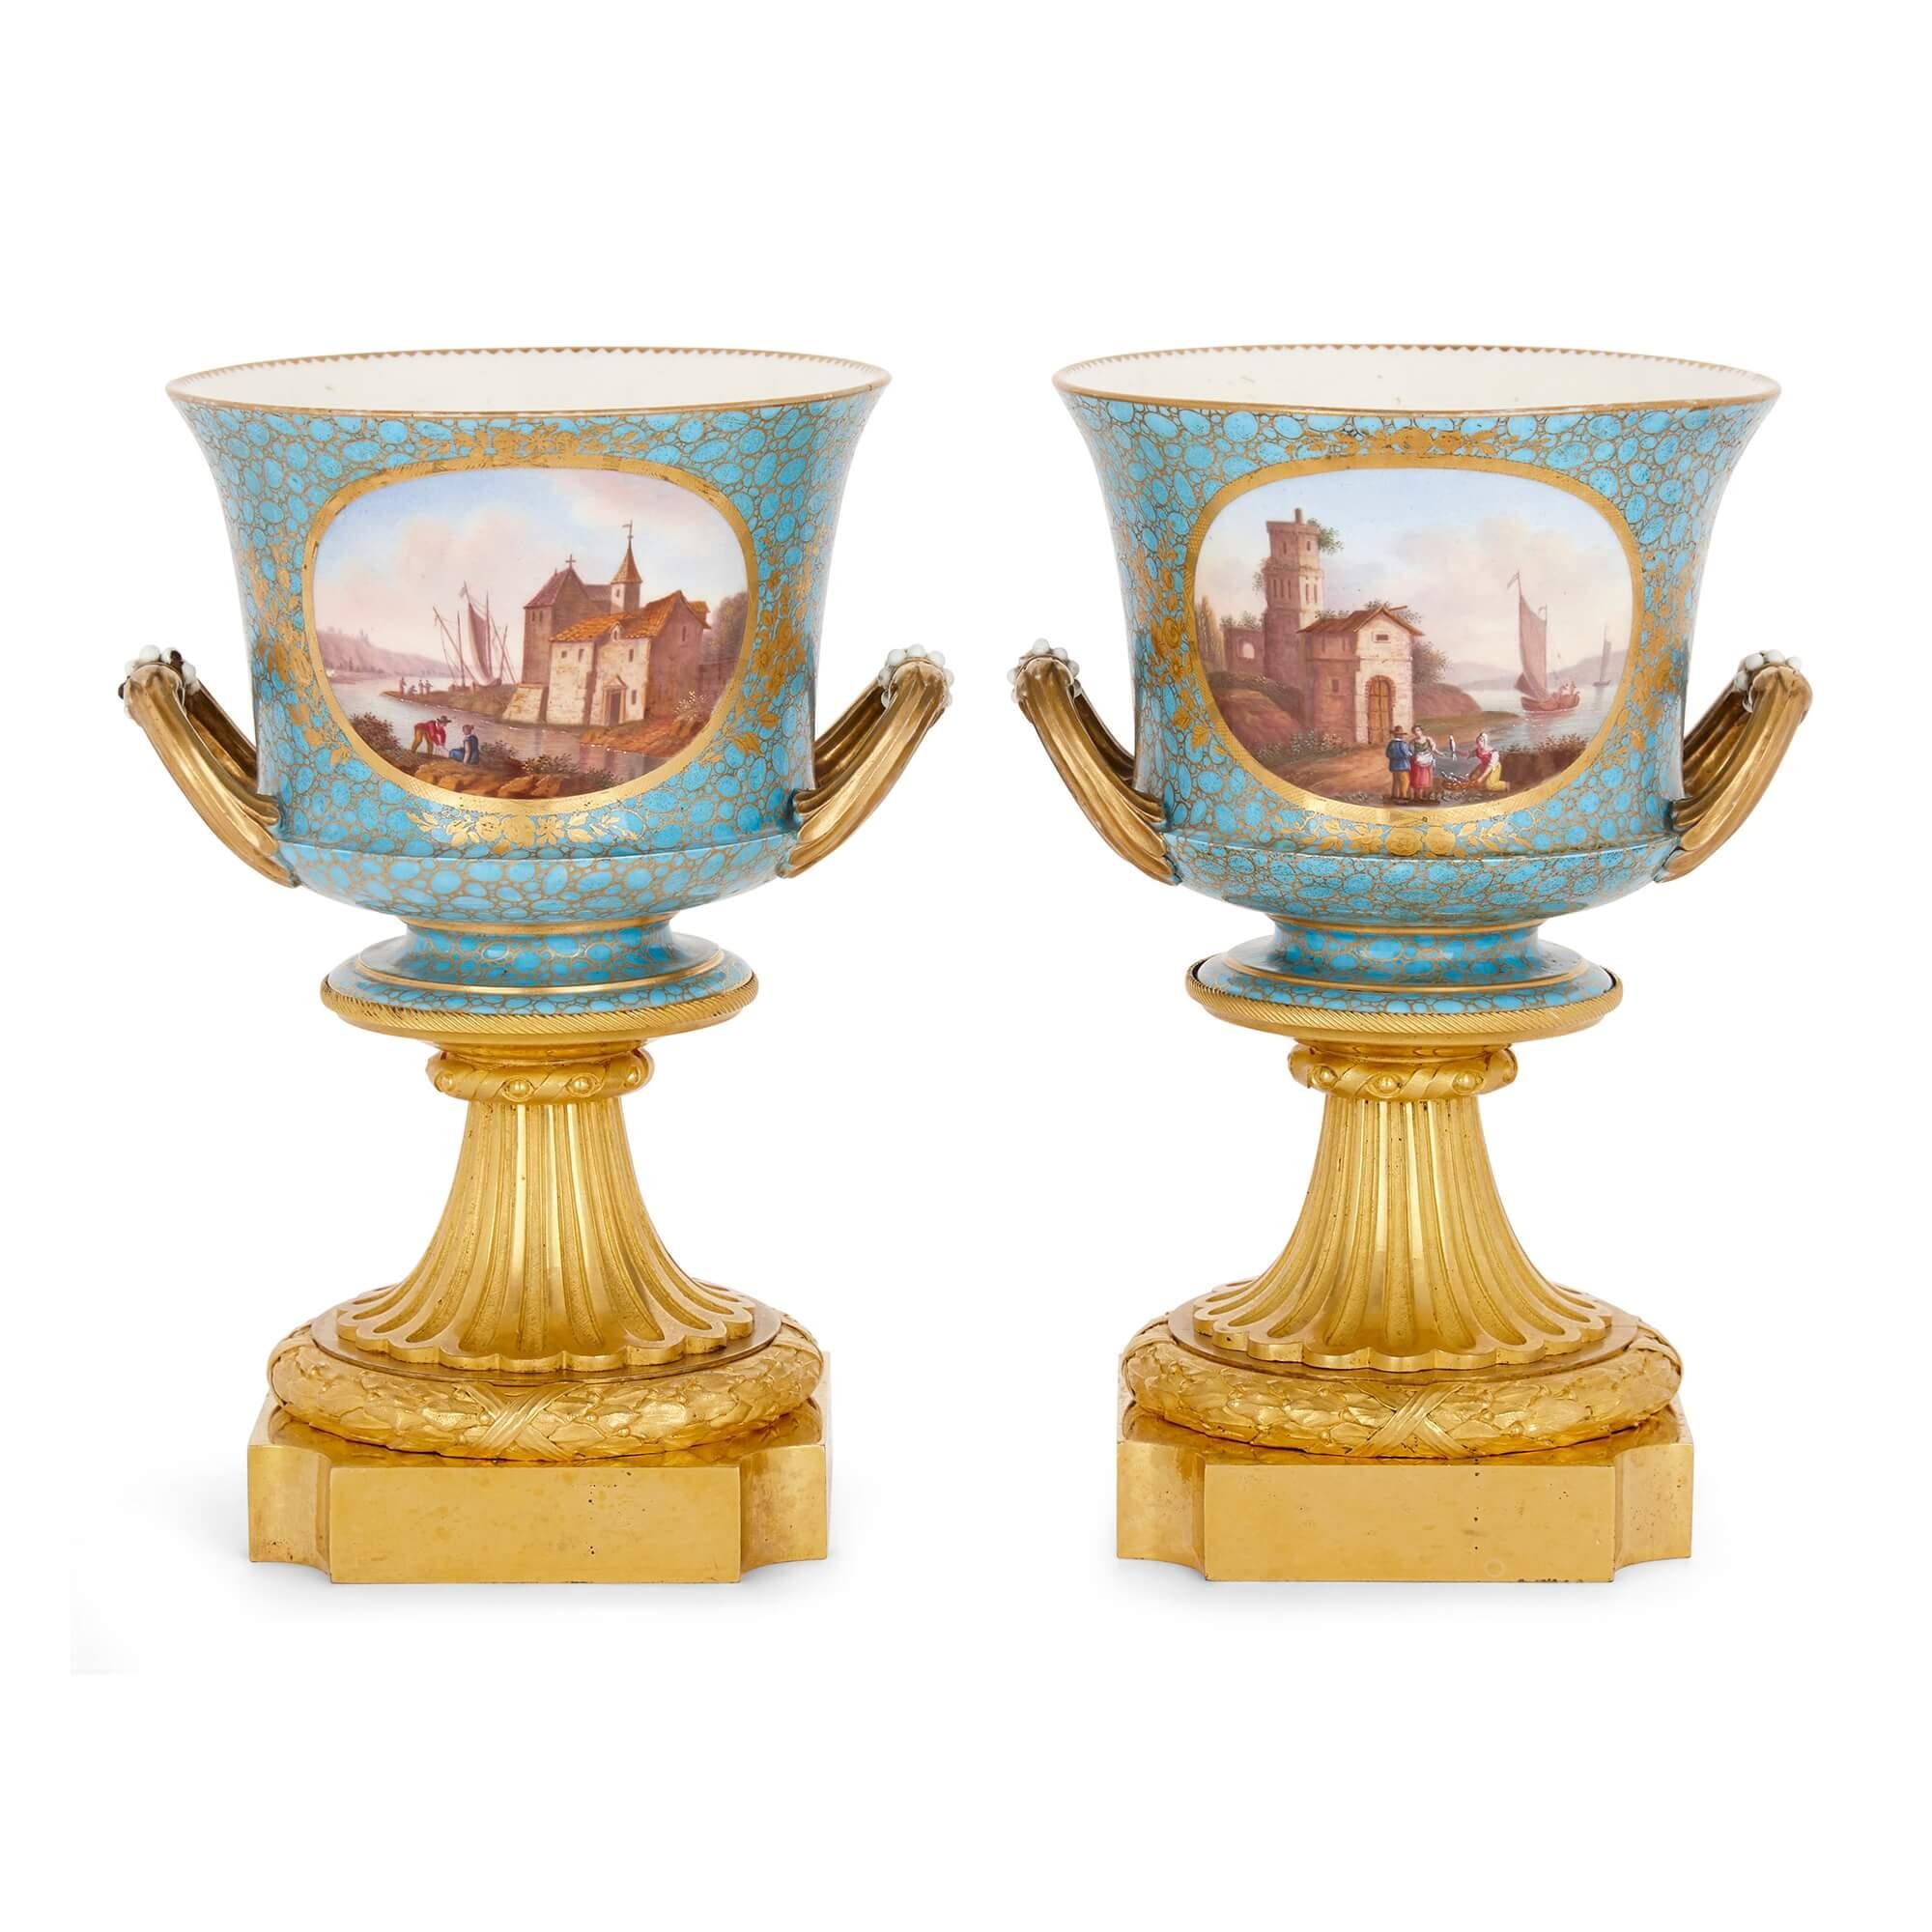 Antique pair of gilt bronze and Sèvres style porcelain cachepot vases
French, 19th Century
Height 24.5cm, width 17cm, depth 15cm

The vases in this elegant pair have been mounted with gilt bronze and decorated in the style of the Sèvres